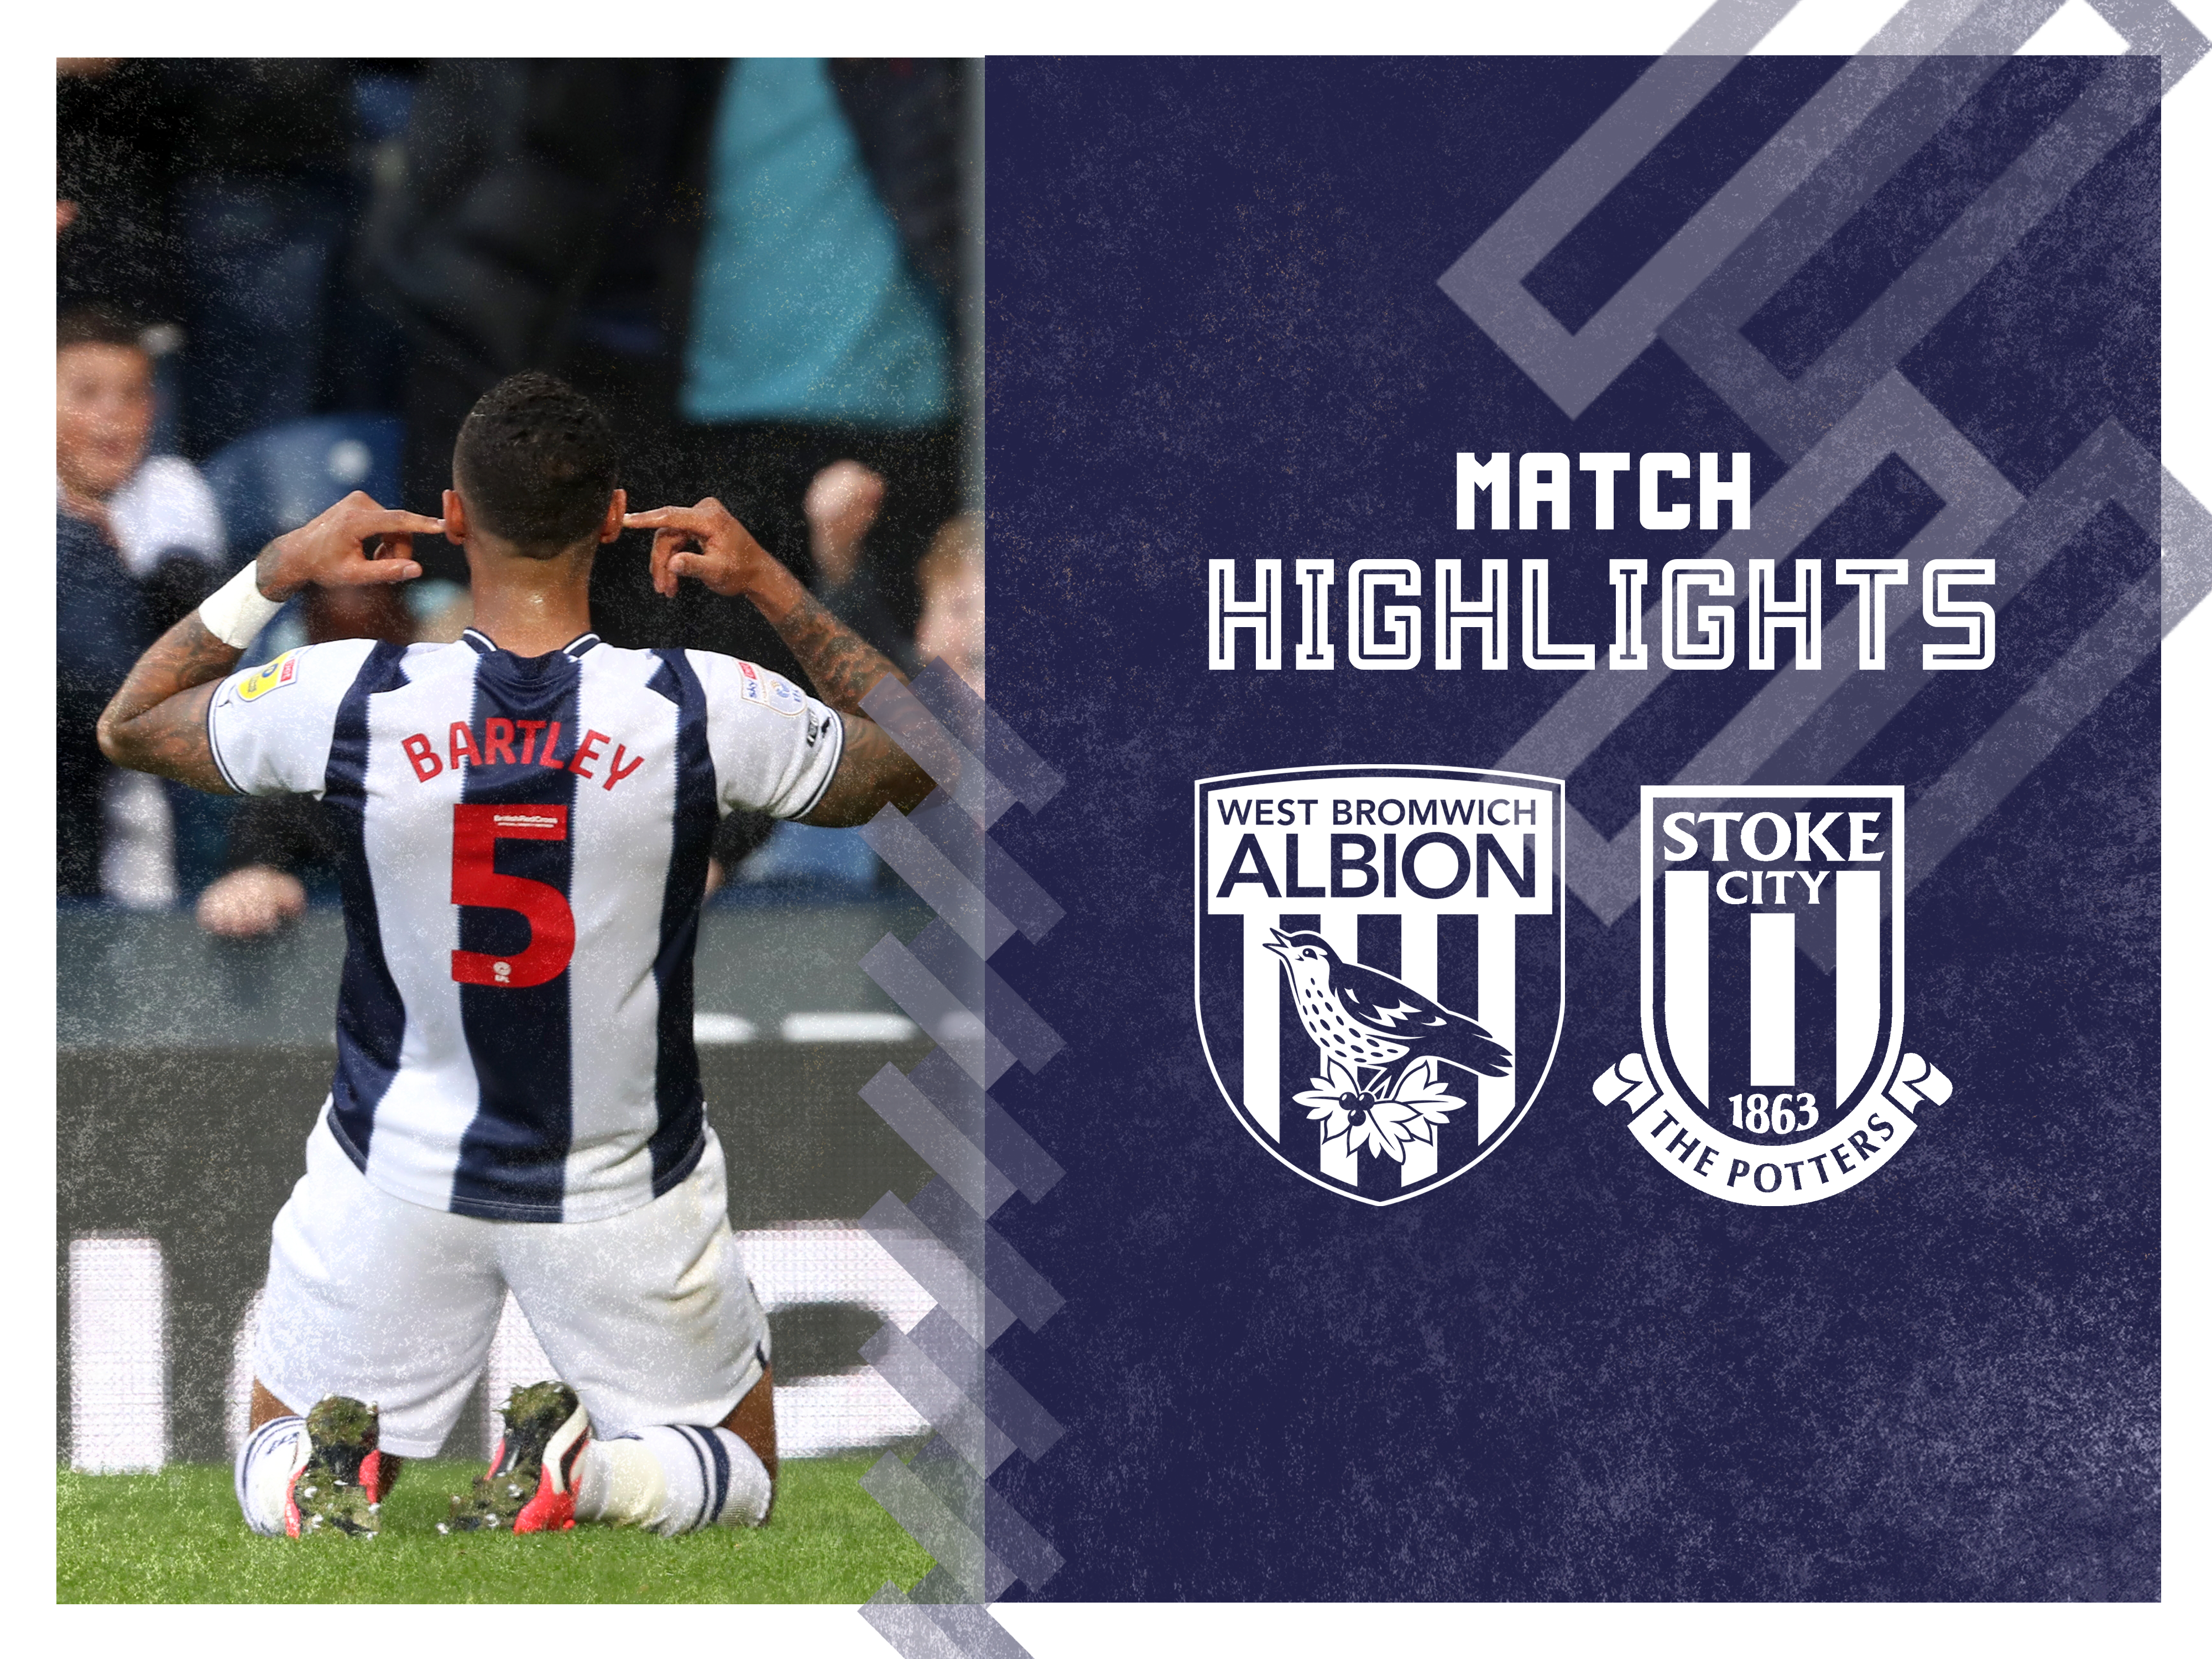 Highlights from Albion's win over Stoke City